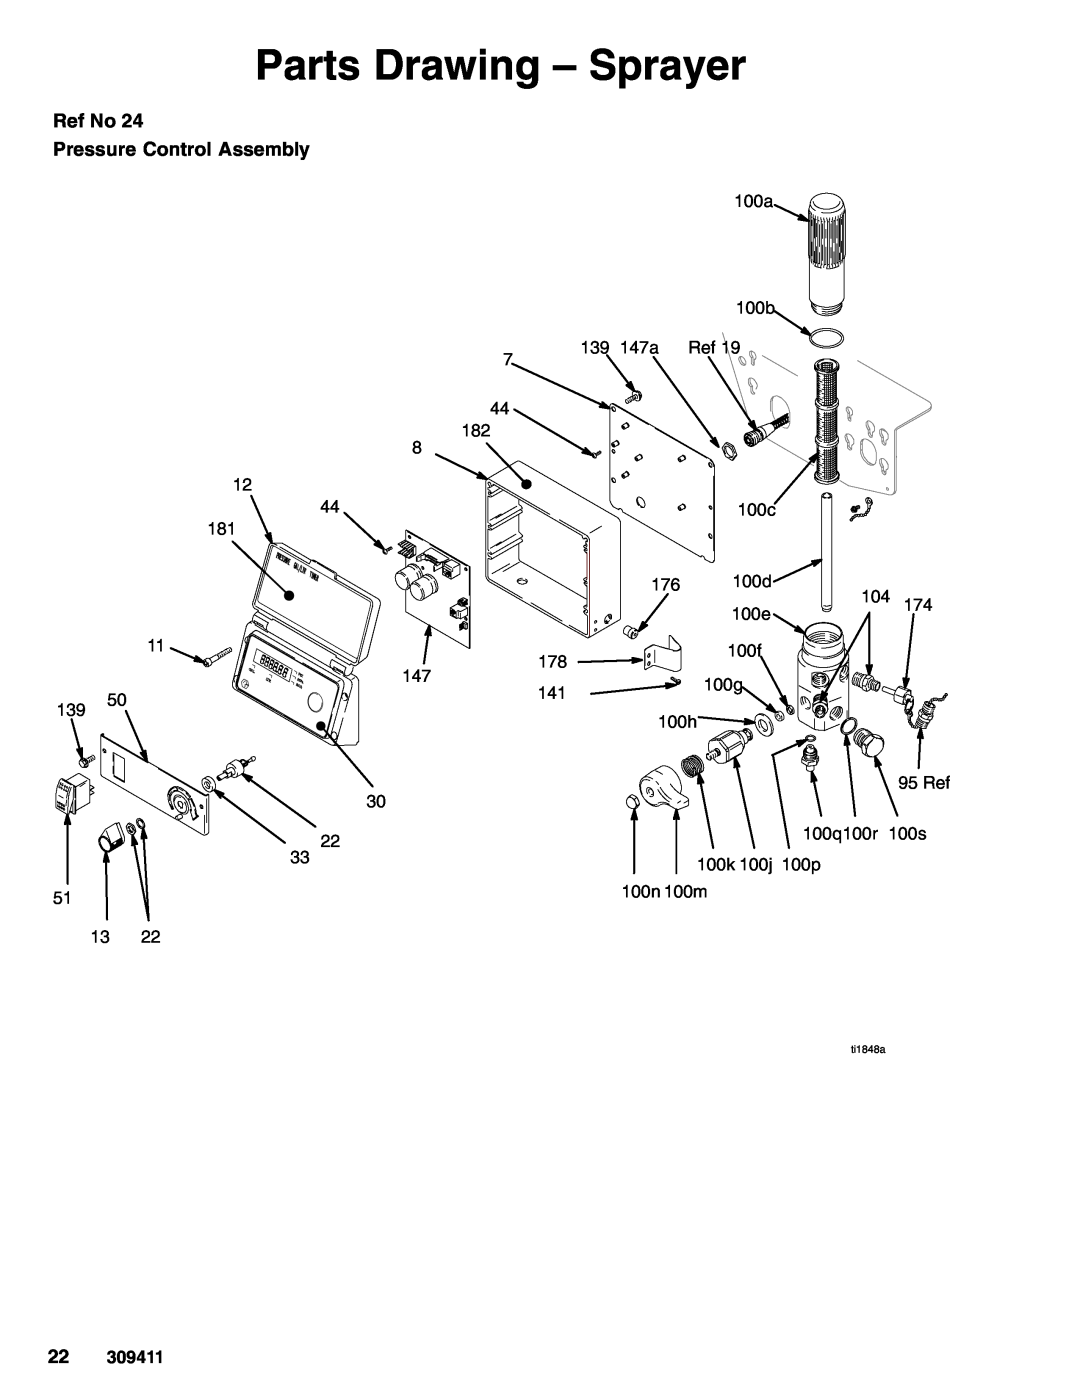 Graco 233712, 233710, 233715, 233711, 233713, 233709, 233714 manual Parts Drawing - Sprayer, Ref No Pressure Control Assembly 